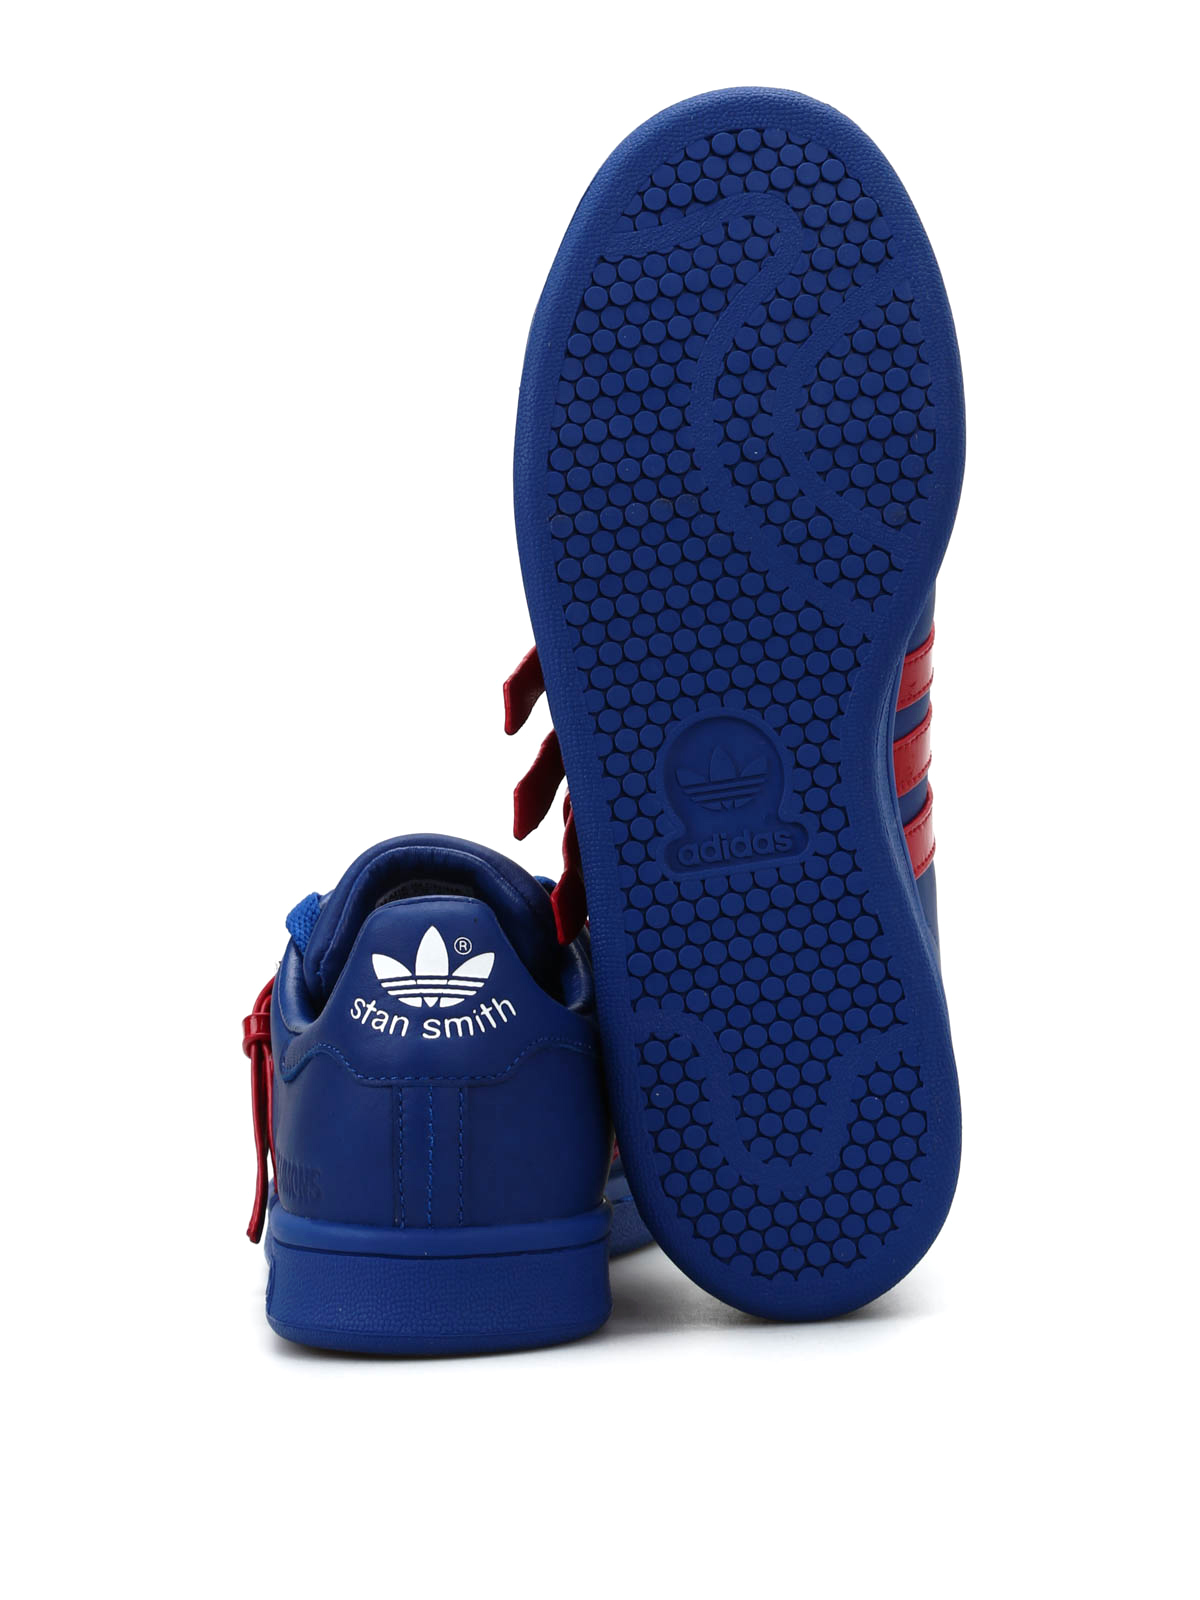 adidas strap trainers